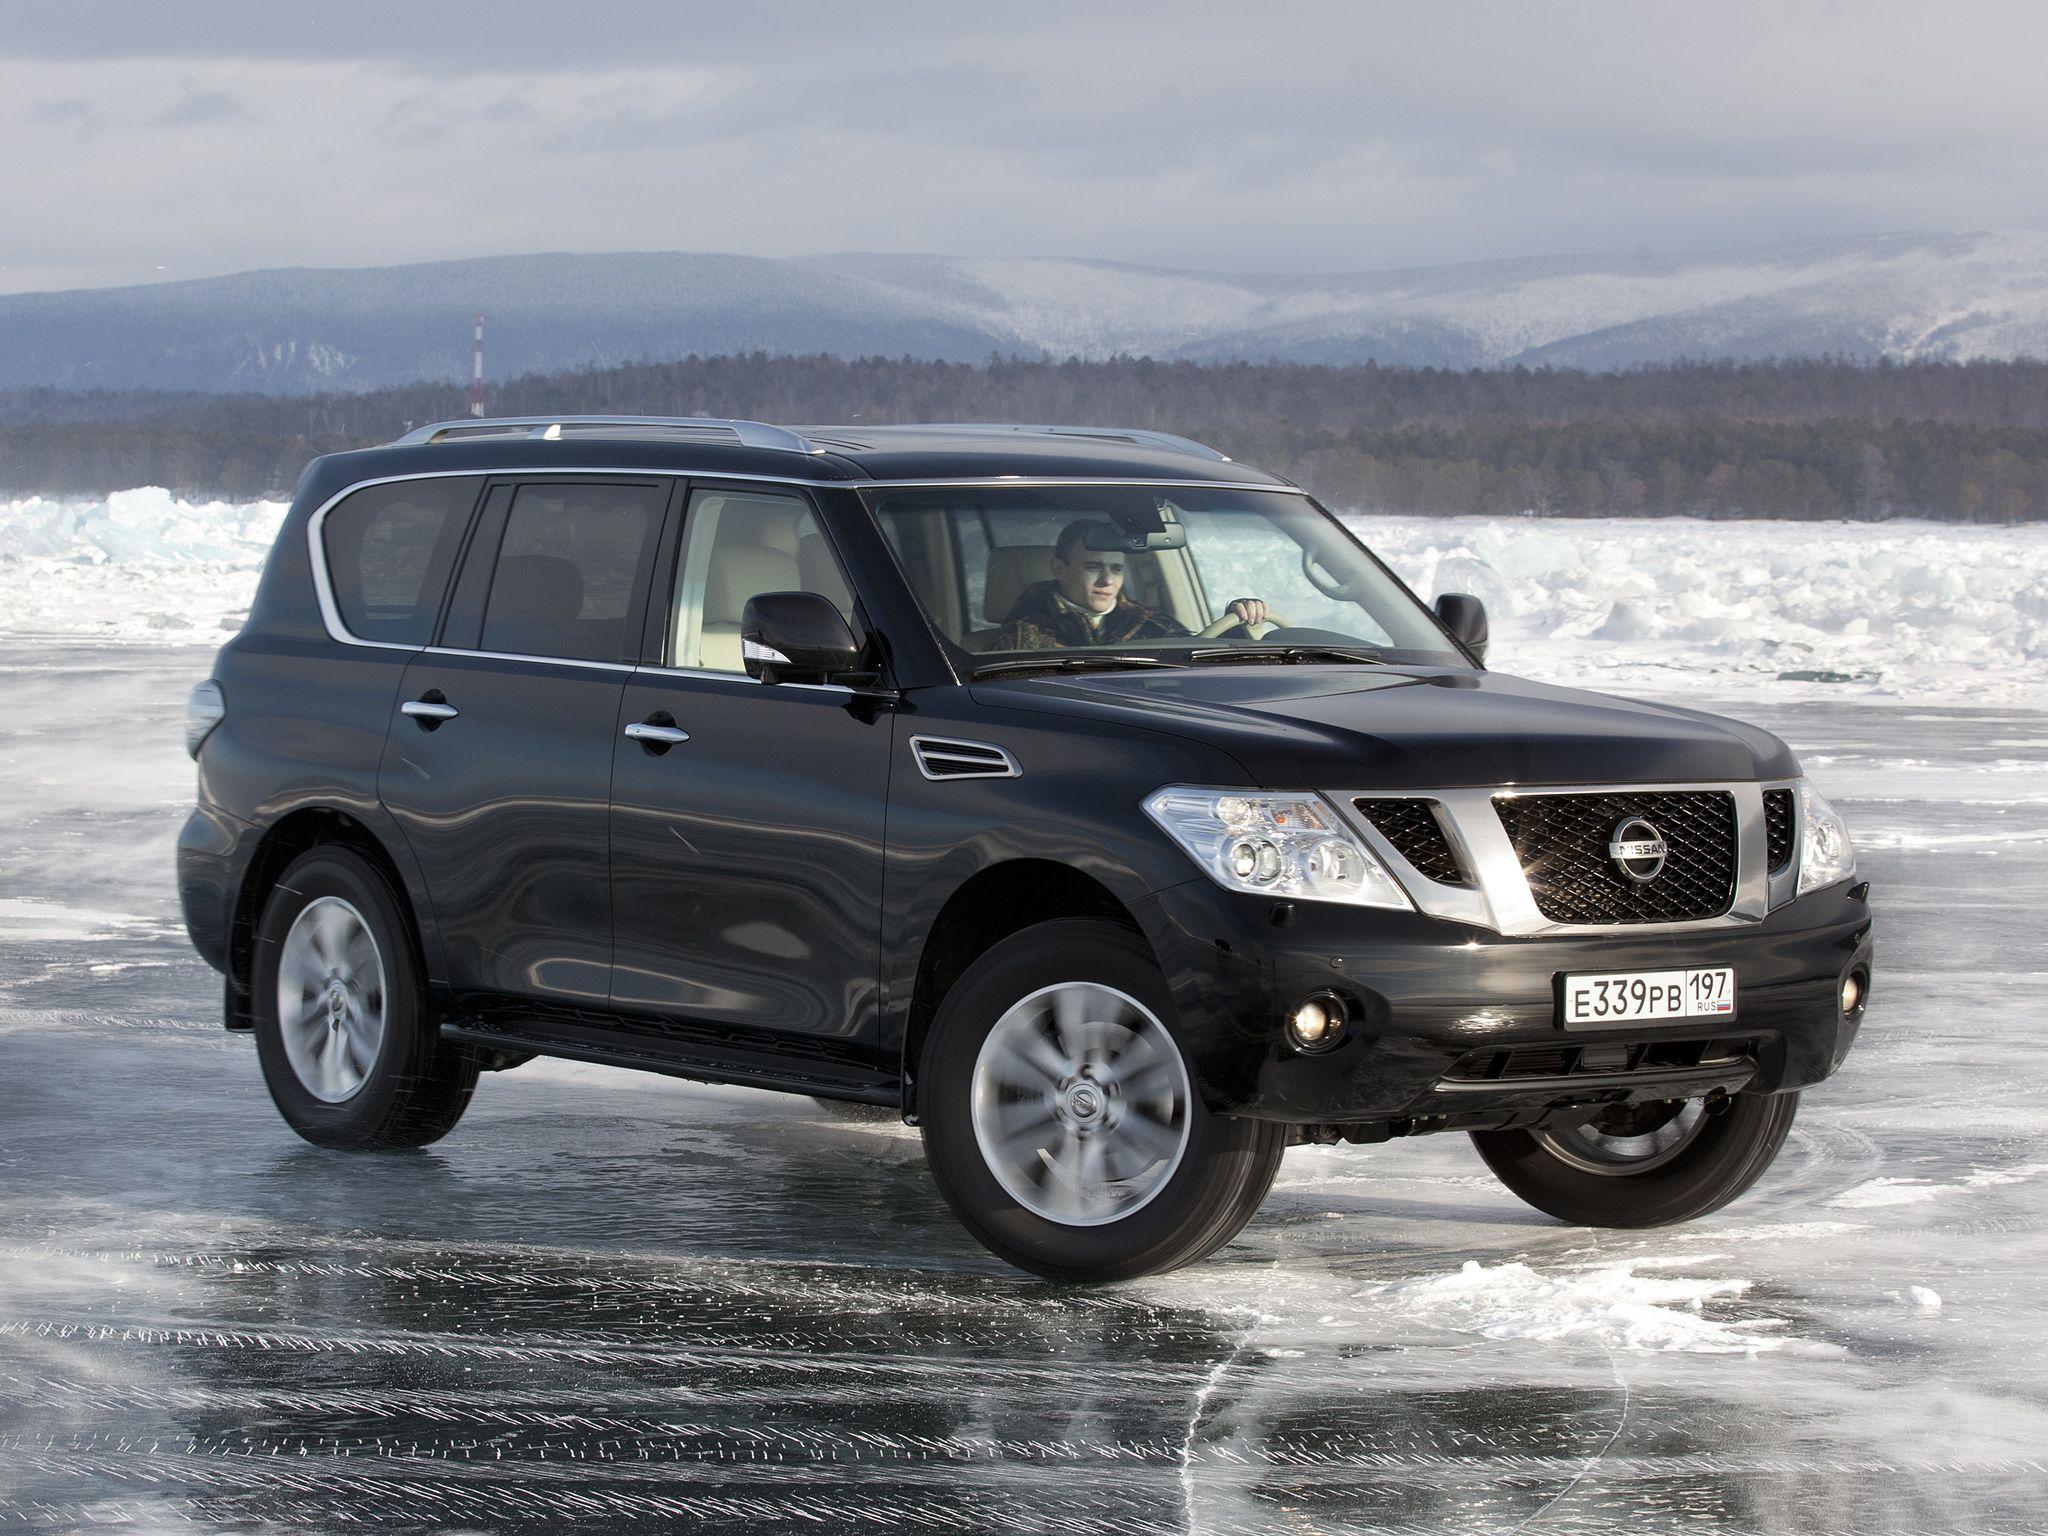 Nissan Patrol picture # 95605. Nissan photo gallery